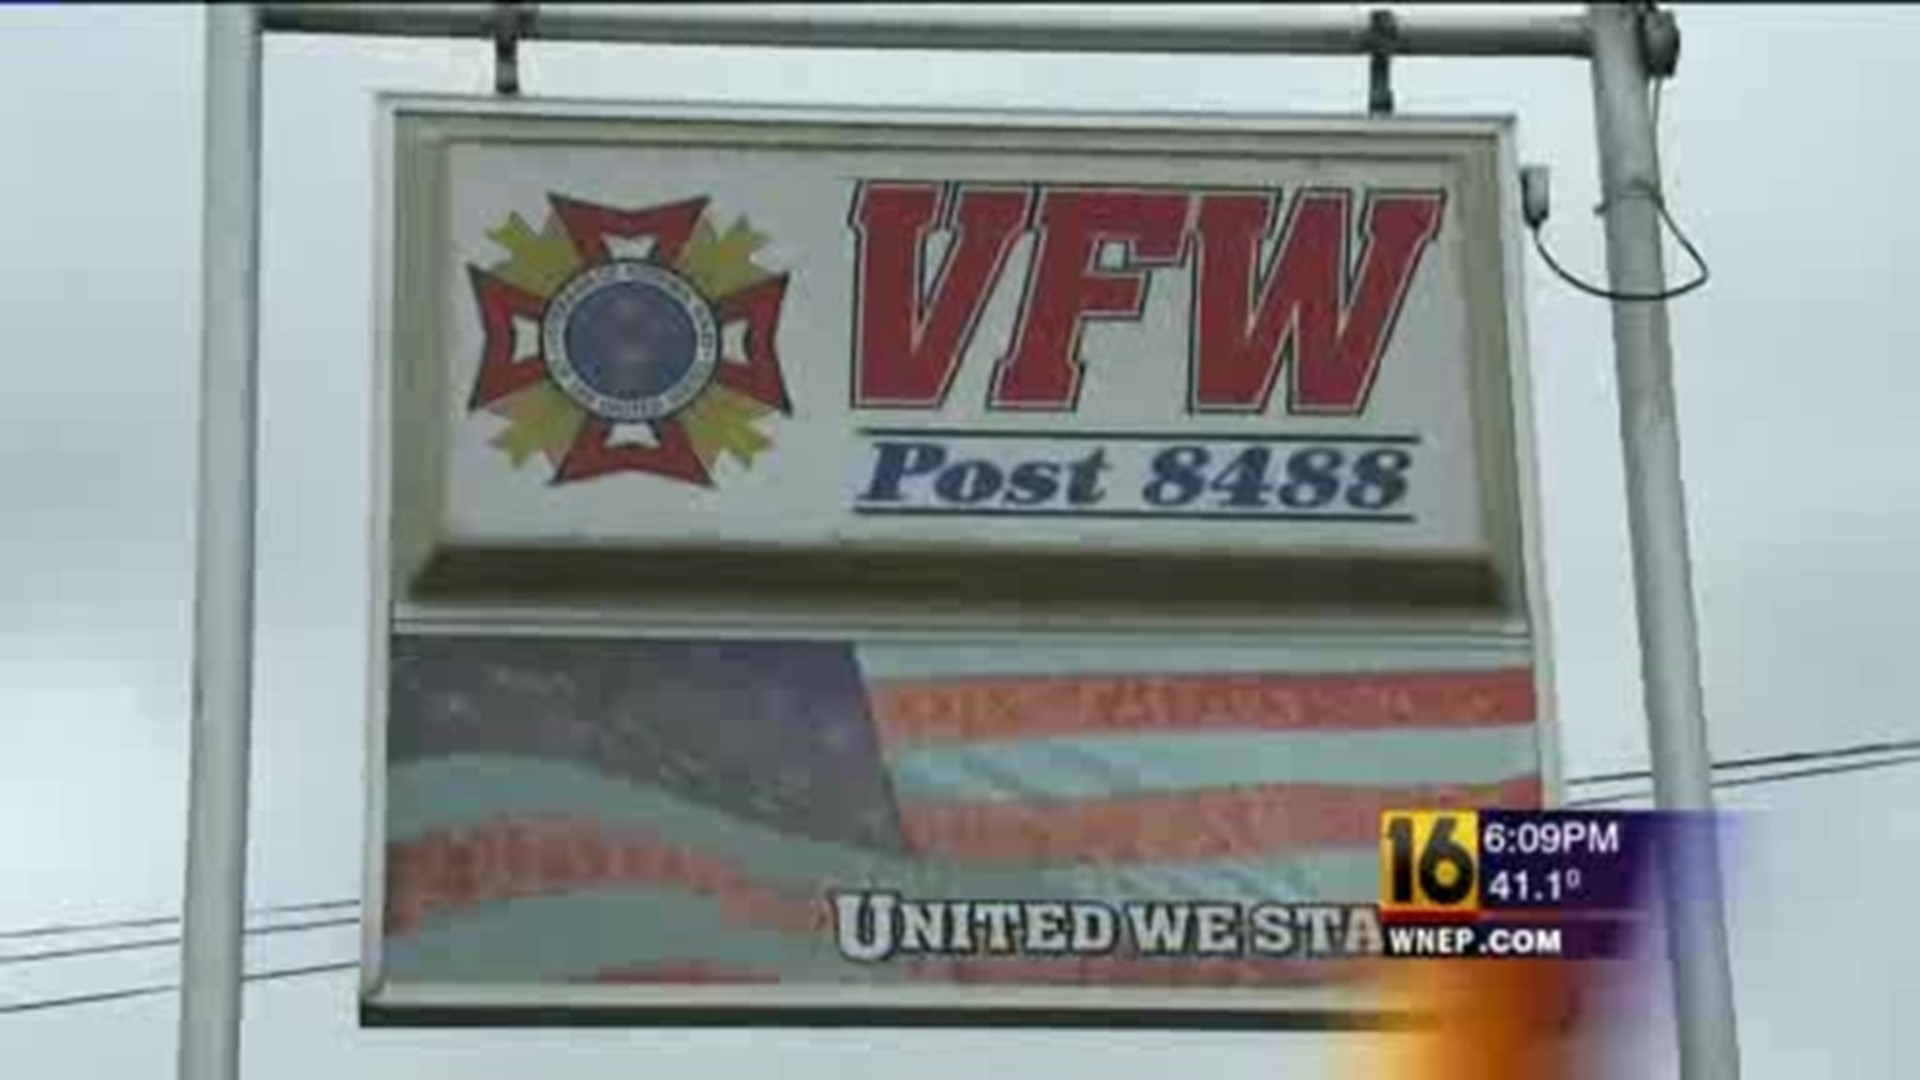 VFW Employee Charged with Theft Agrees to Restitution